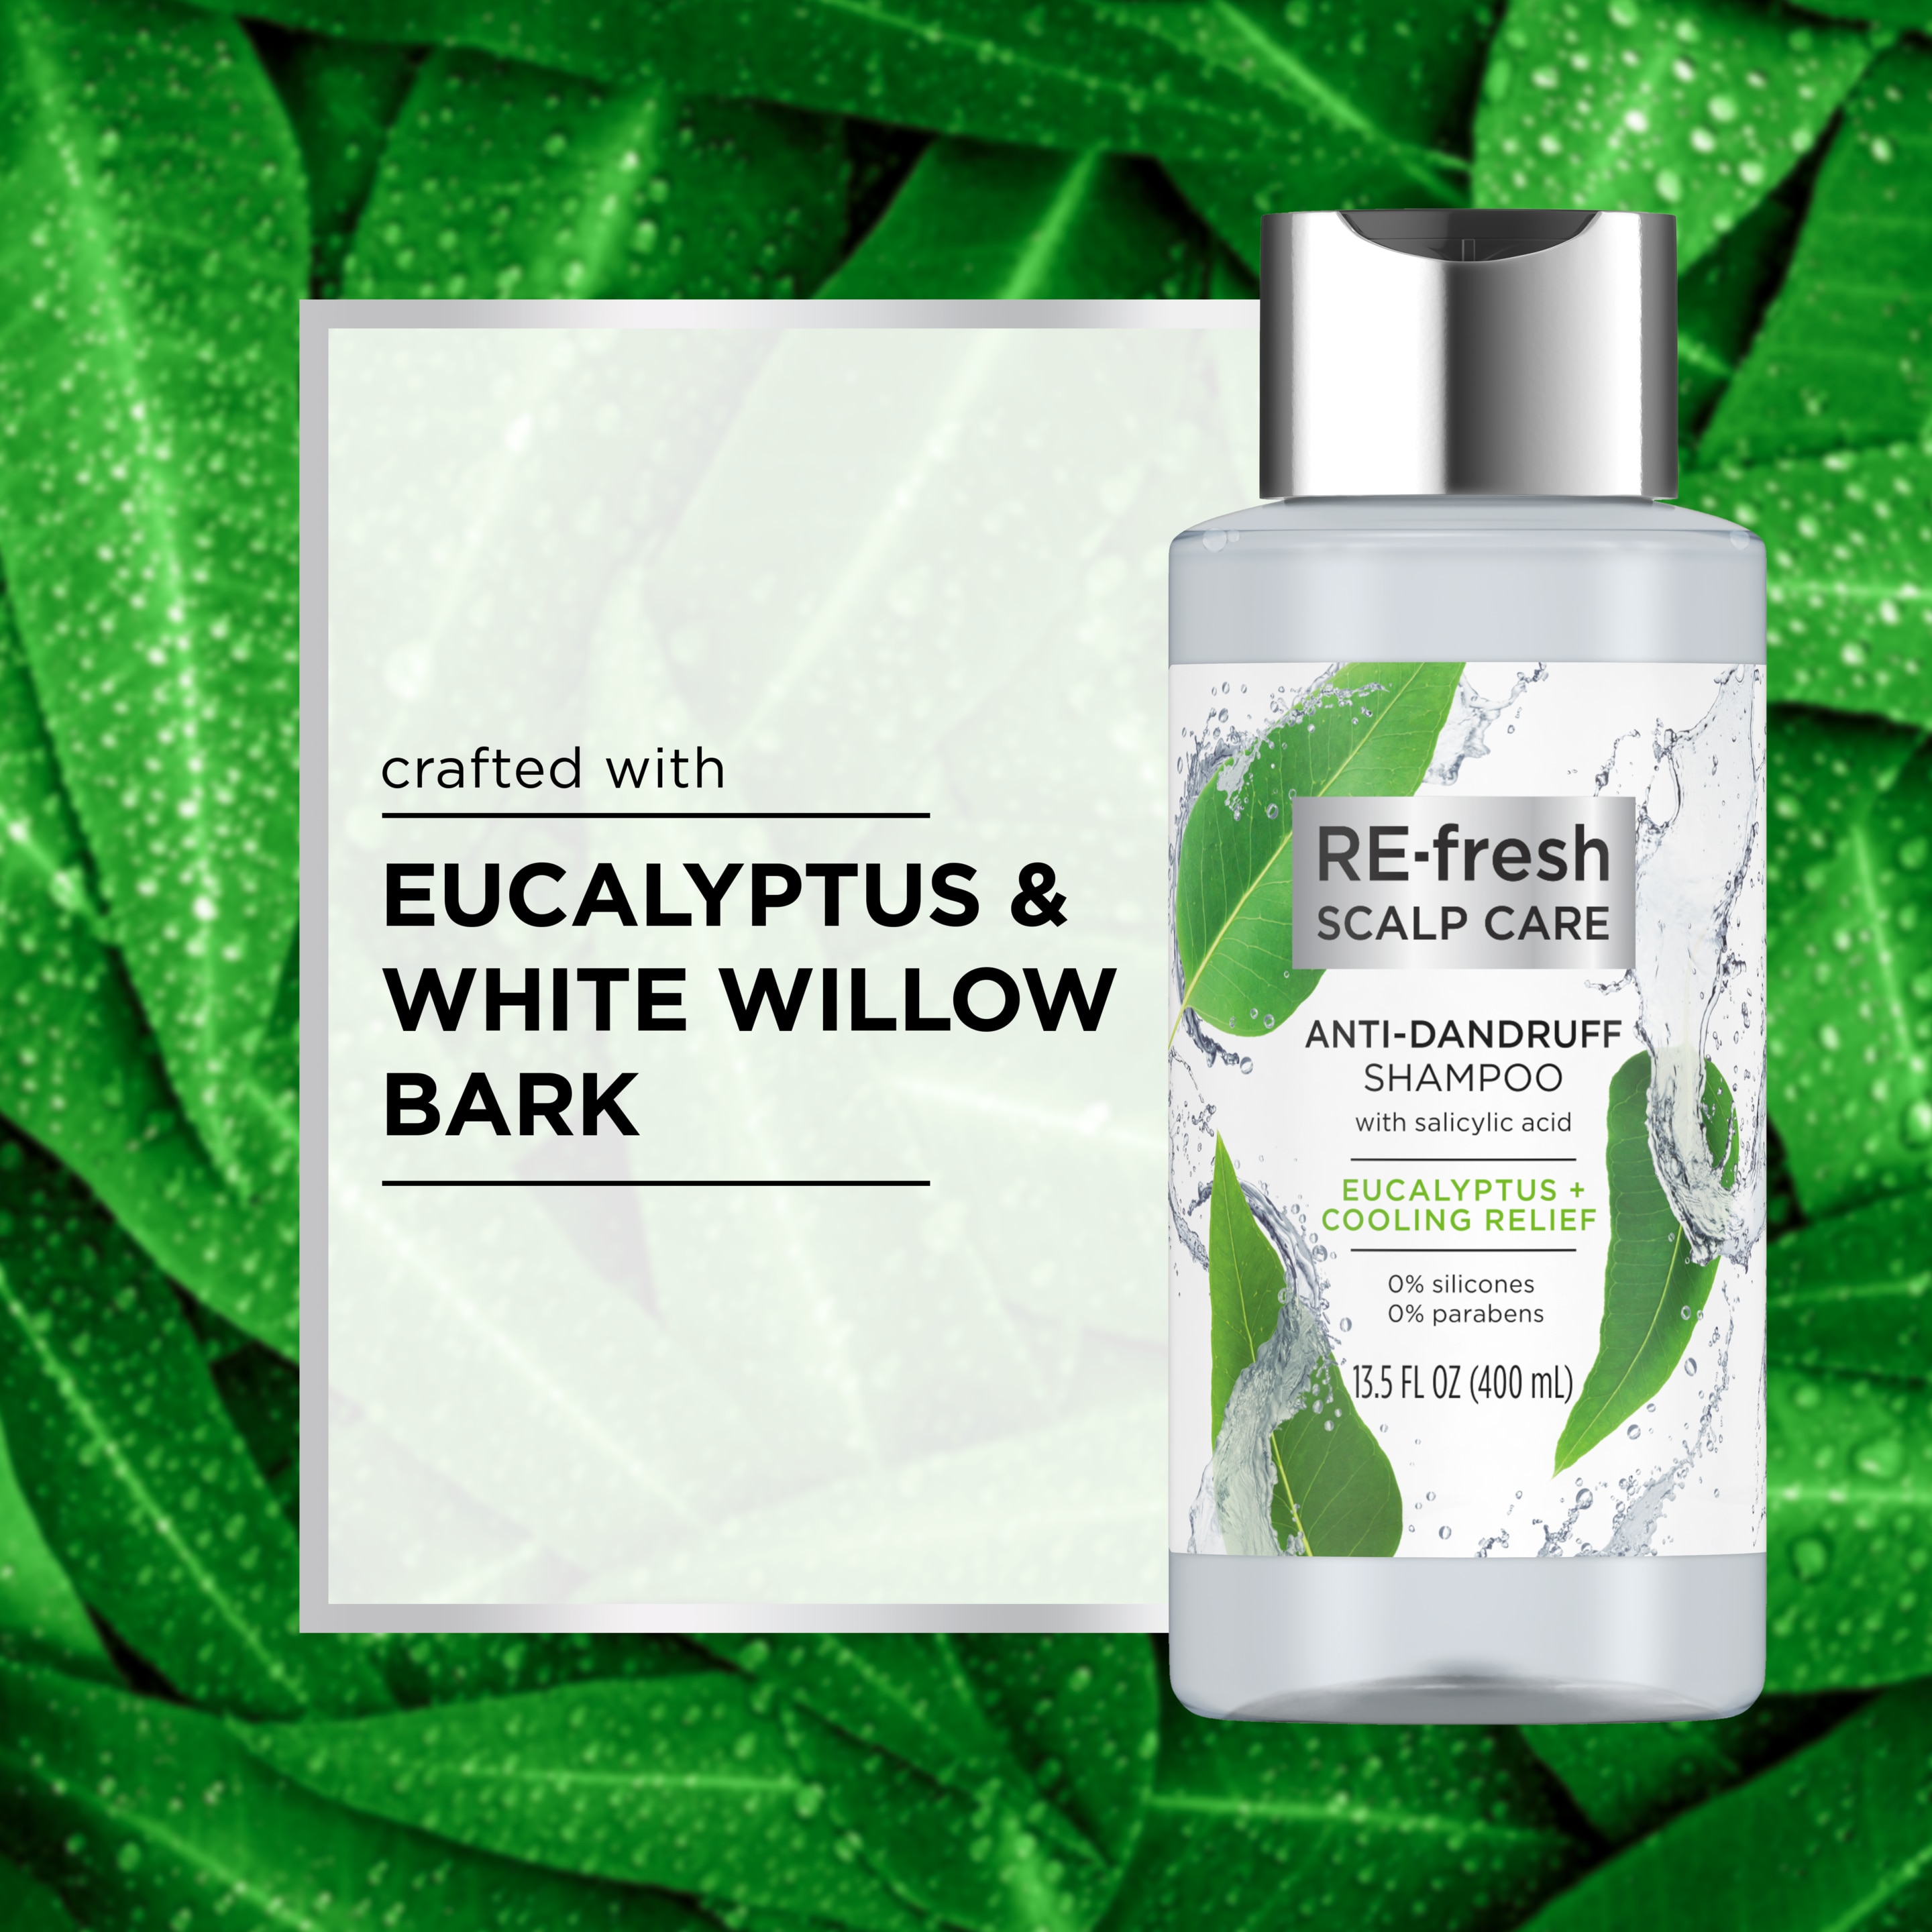 Ingredient Asset RE-fresh Eucalyptus + Cooling Relief Conditioner